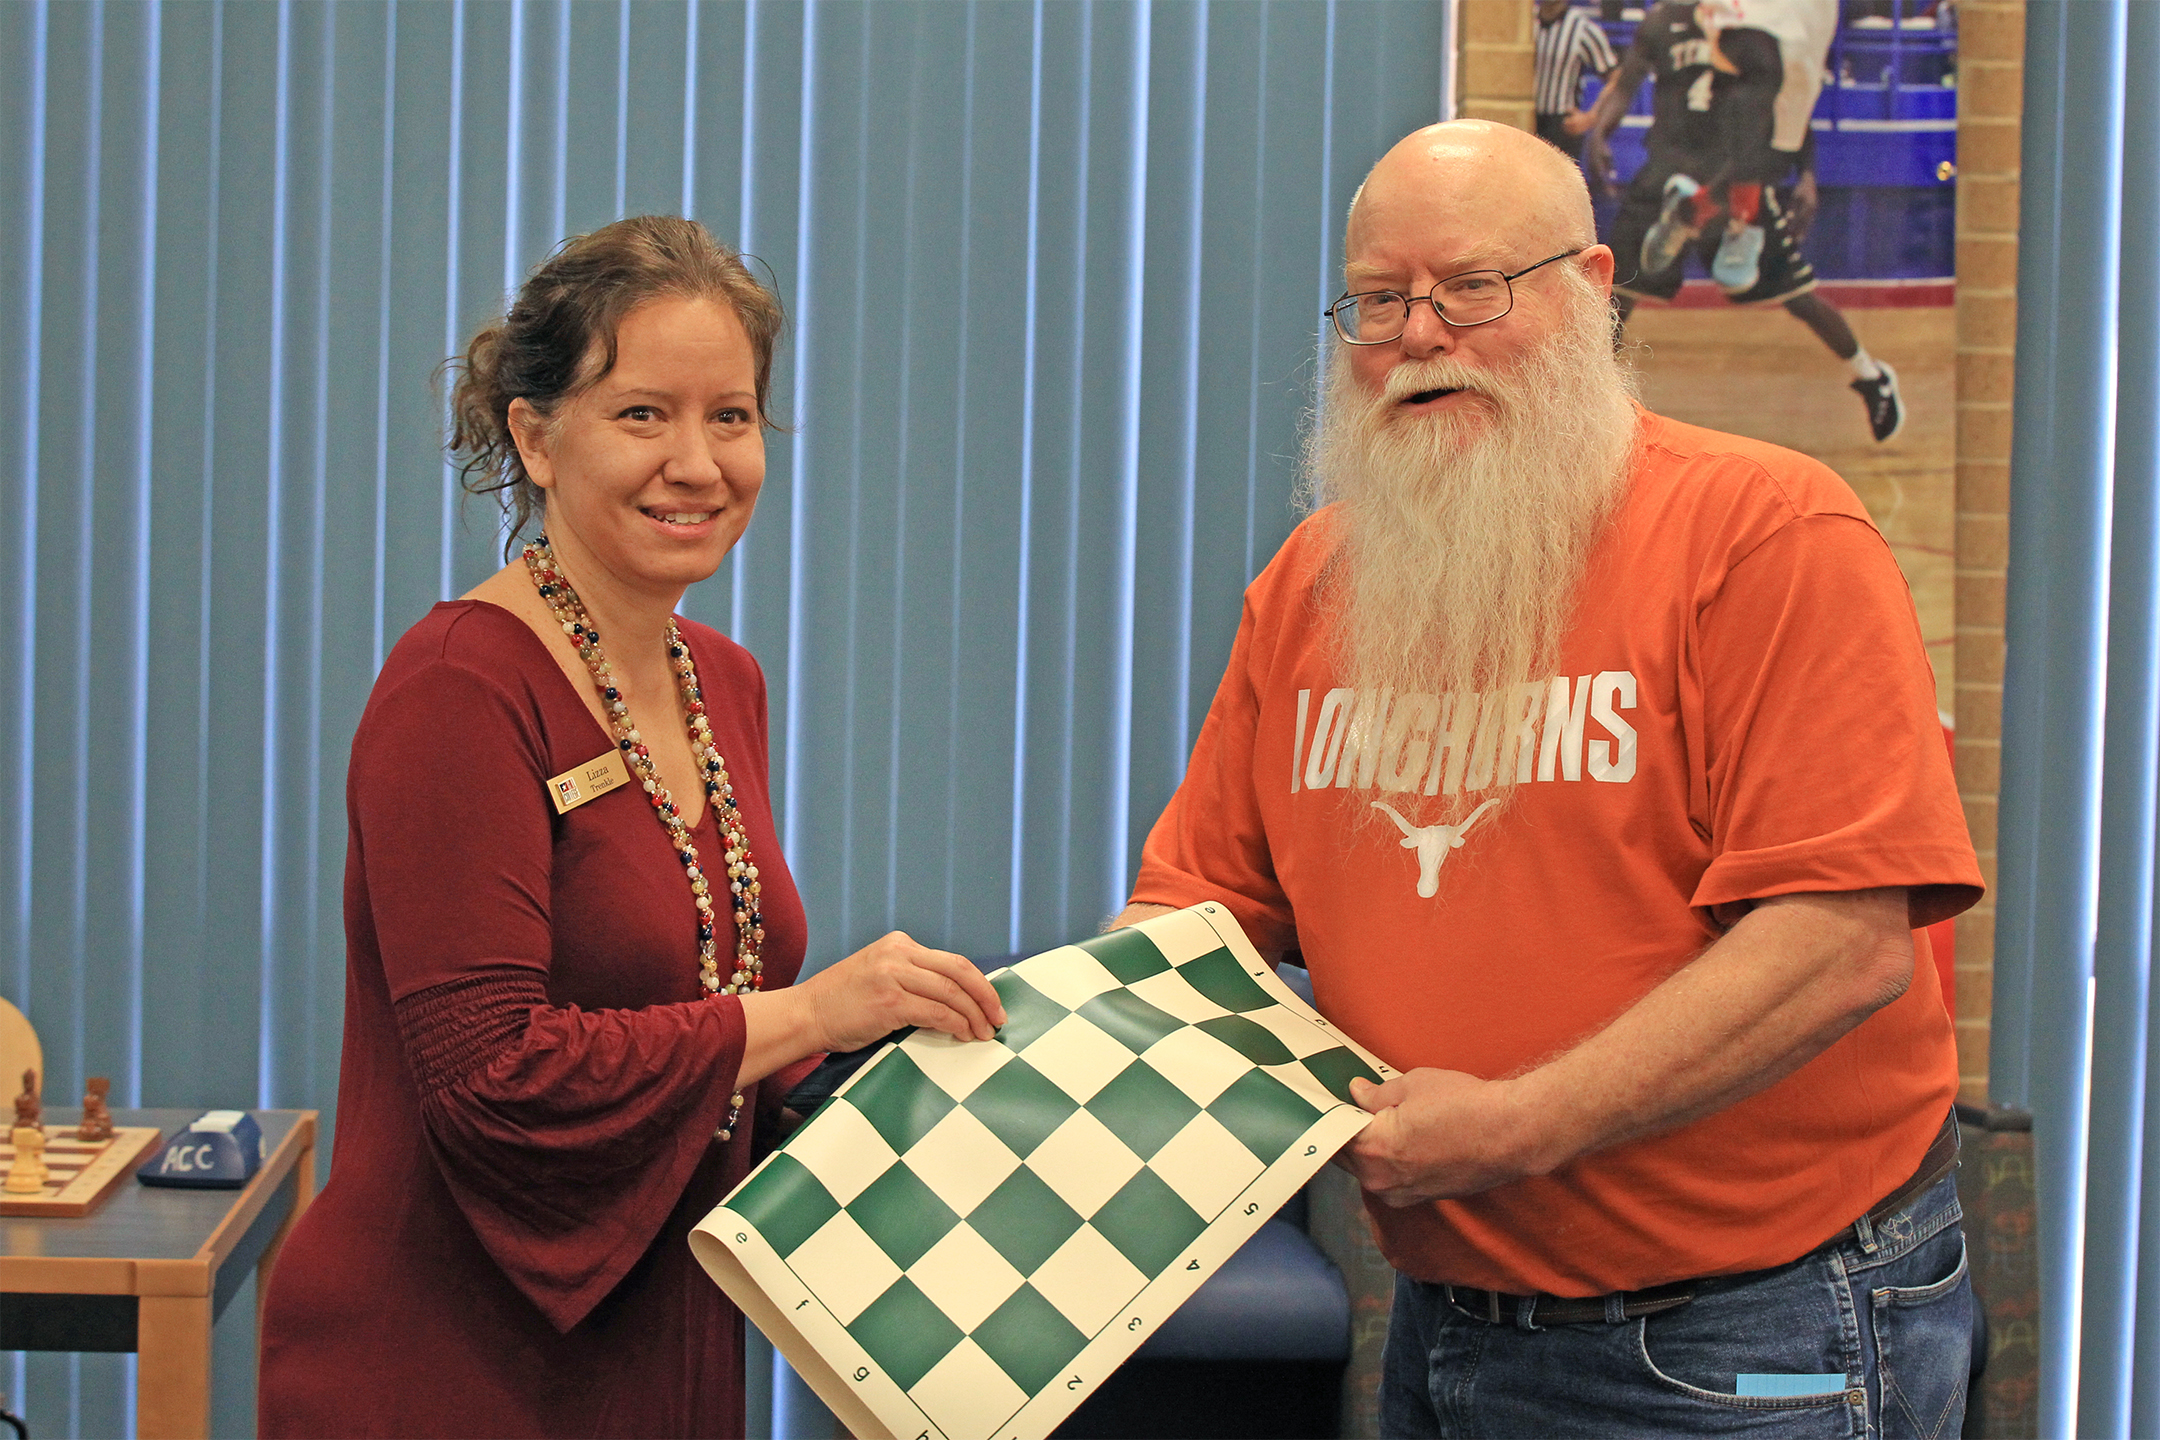 Lizza Trenkle, Vice-President of Student Affairs (left), received a chess set and board (donated by the Tarrant County Chess Club), in appreciation for her eloquent words, from Chief Organizer Jim Hollingsworth.  Photo by Sheri Hemrick.